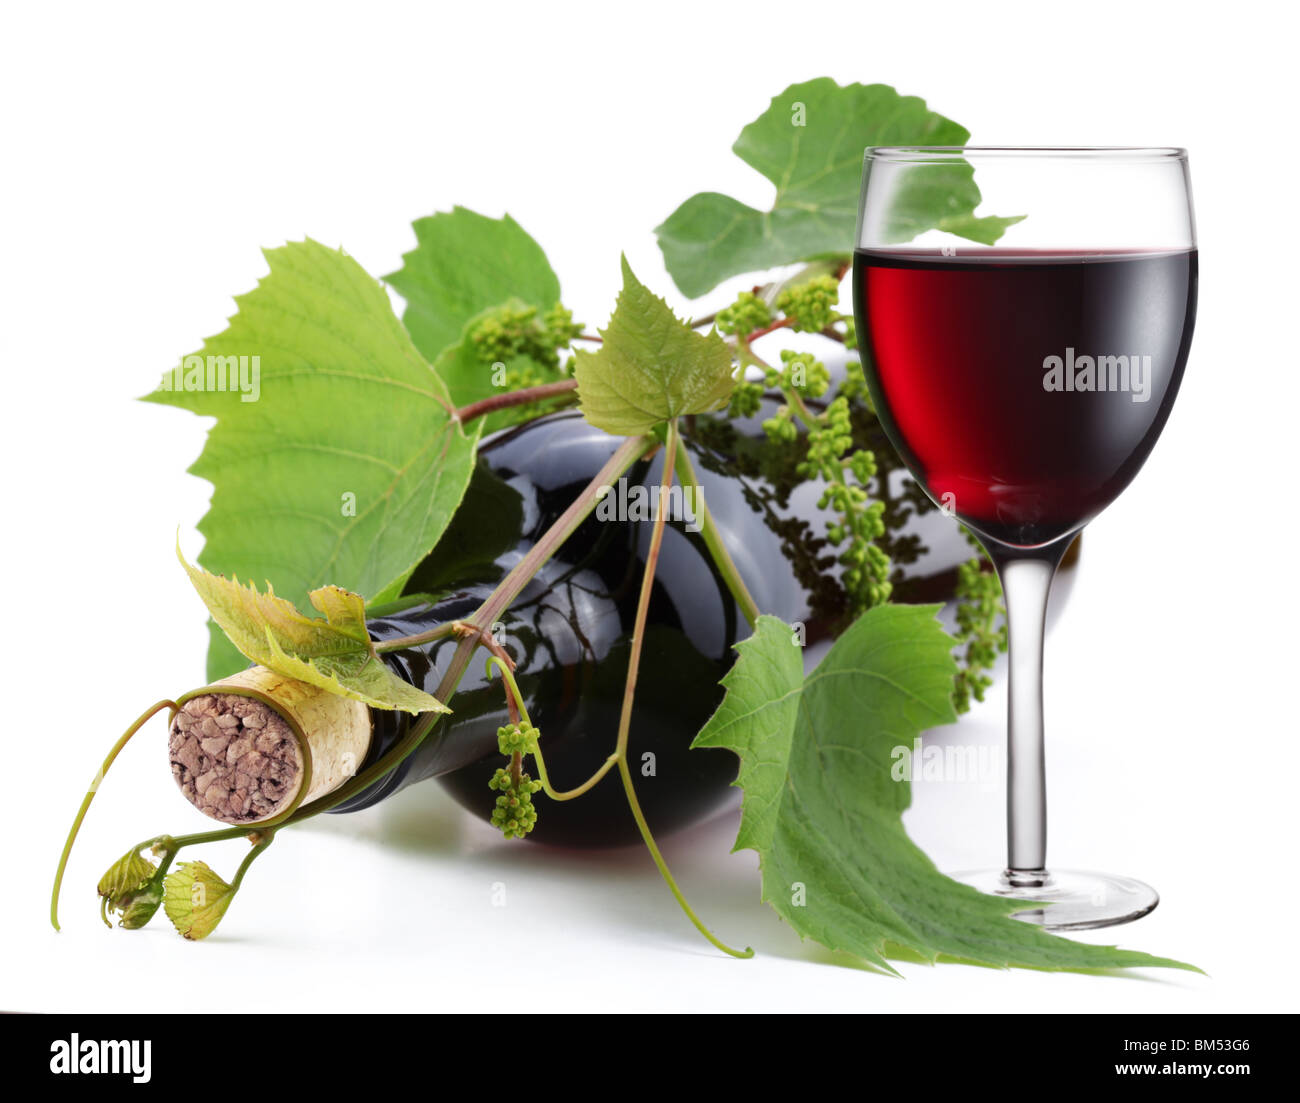 Bottle of wine in the vine on a white background Stock Photo